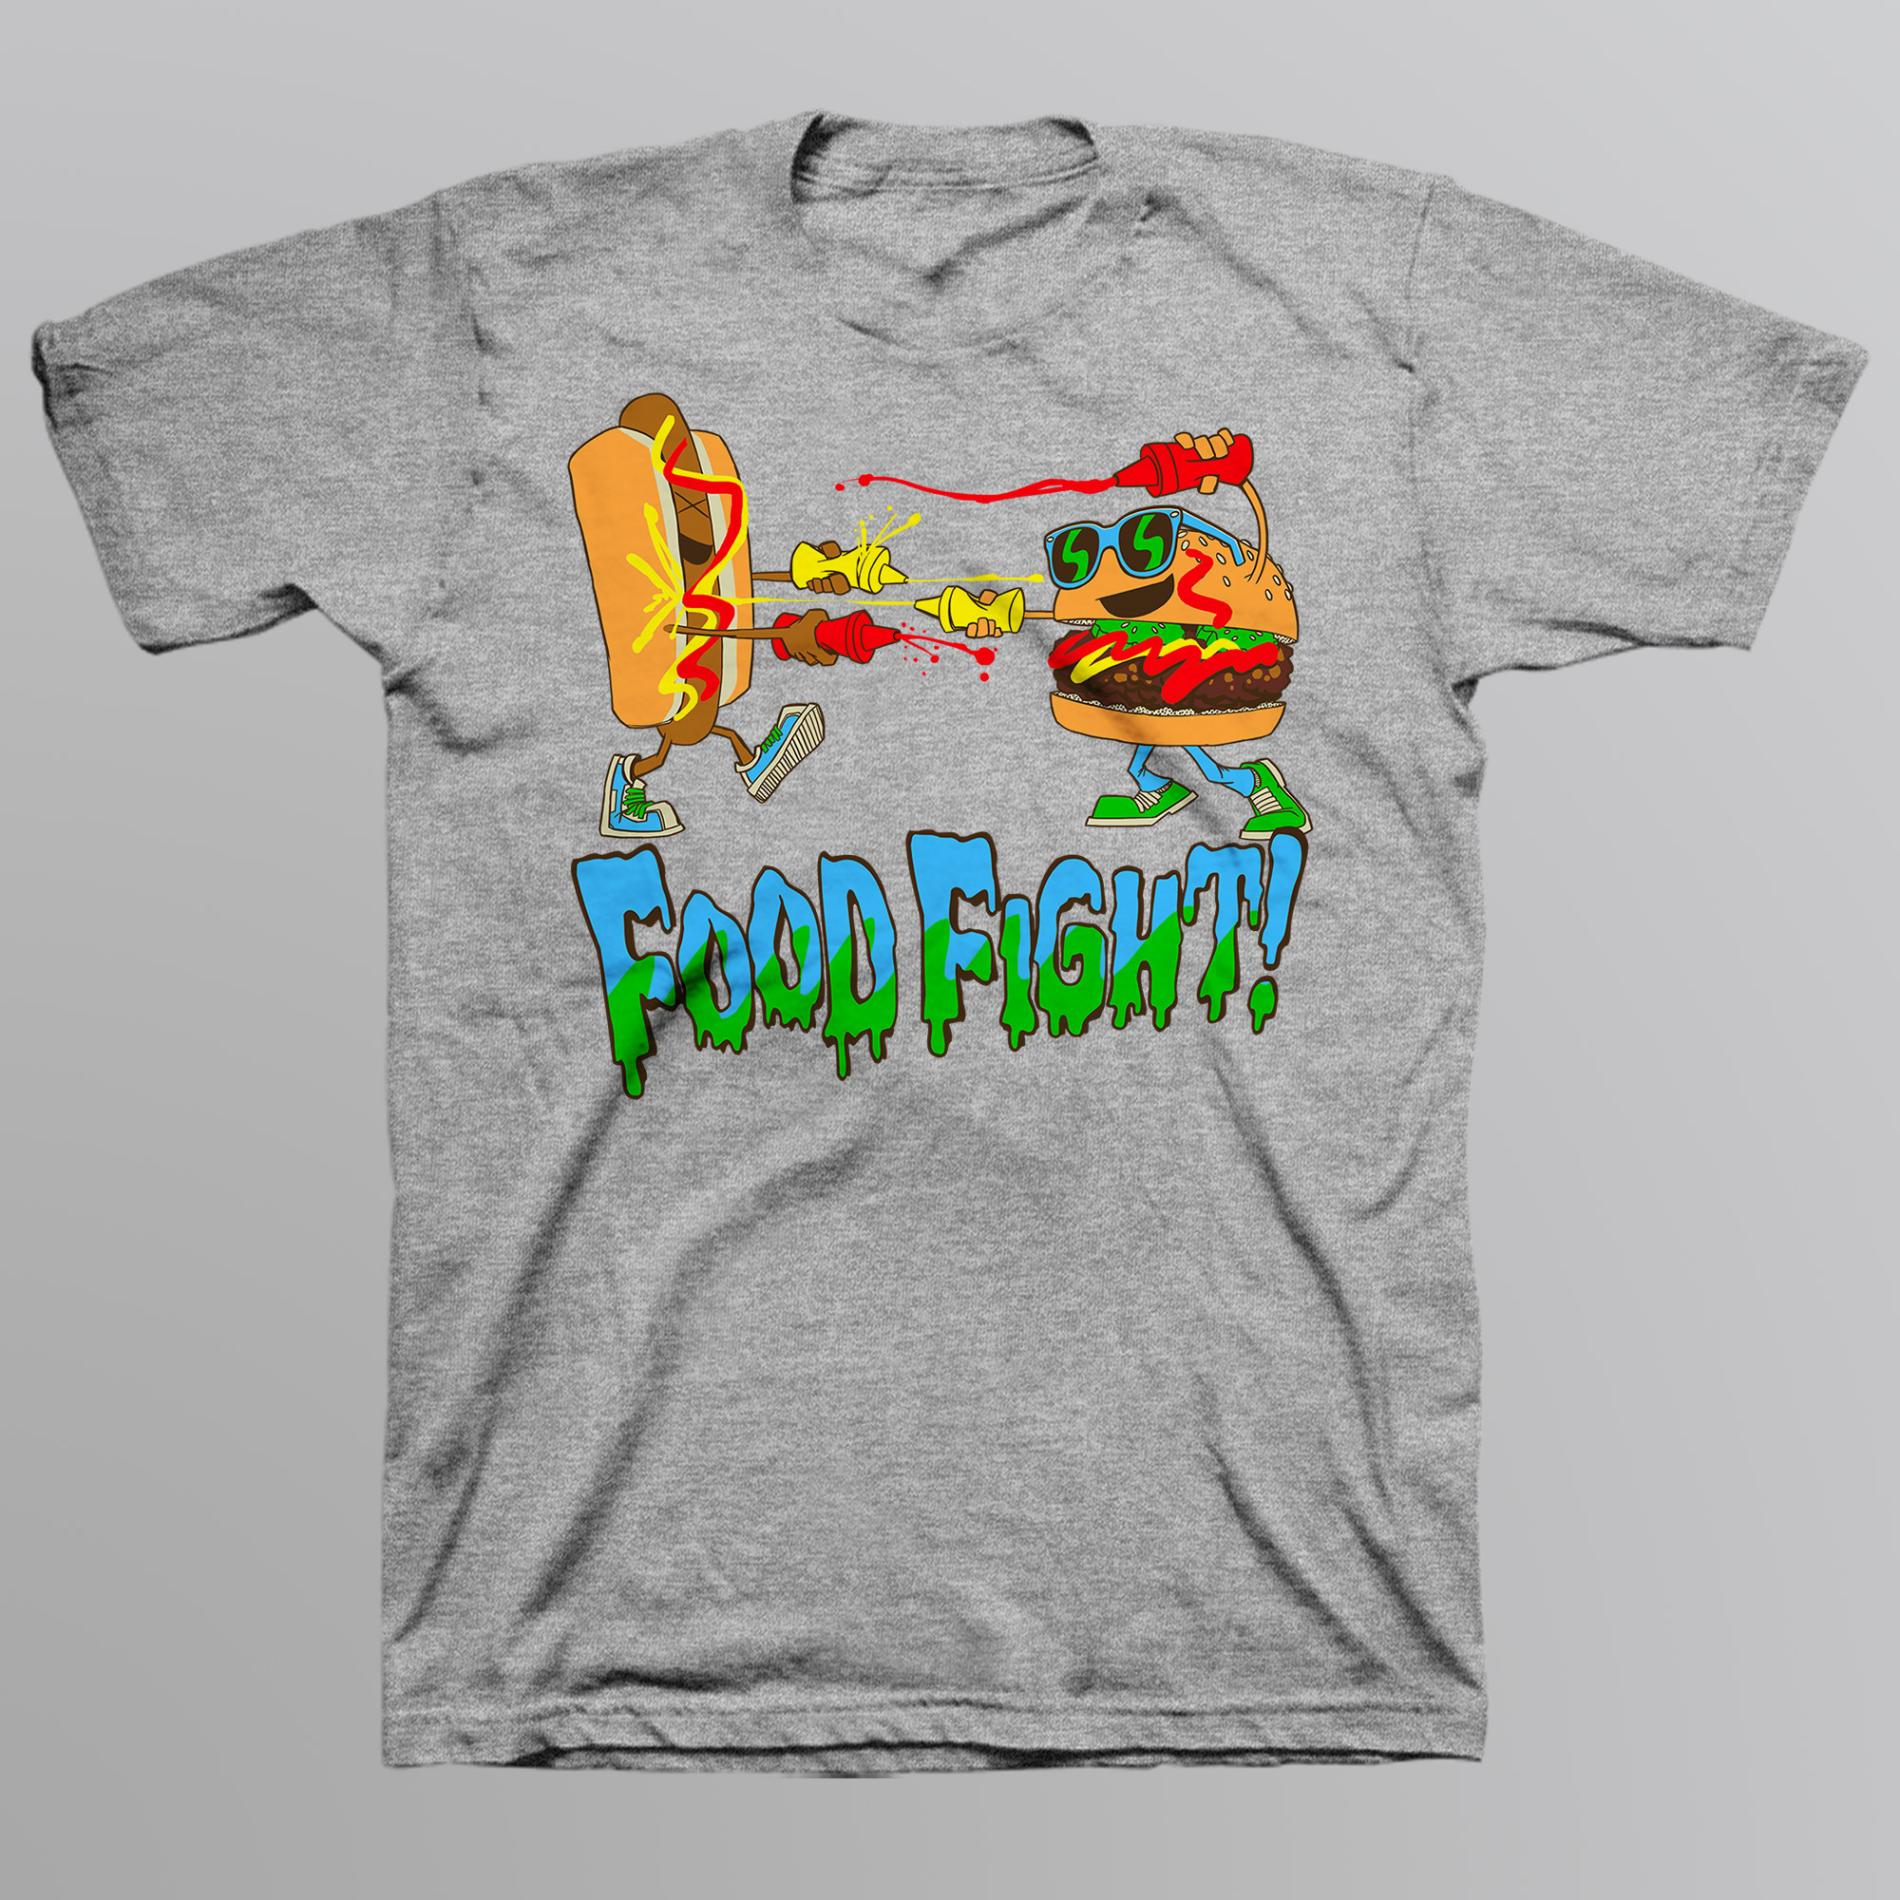 Route 66 Boy's Graphic T-Shirt - Food Fight